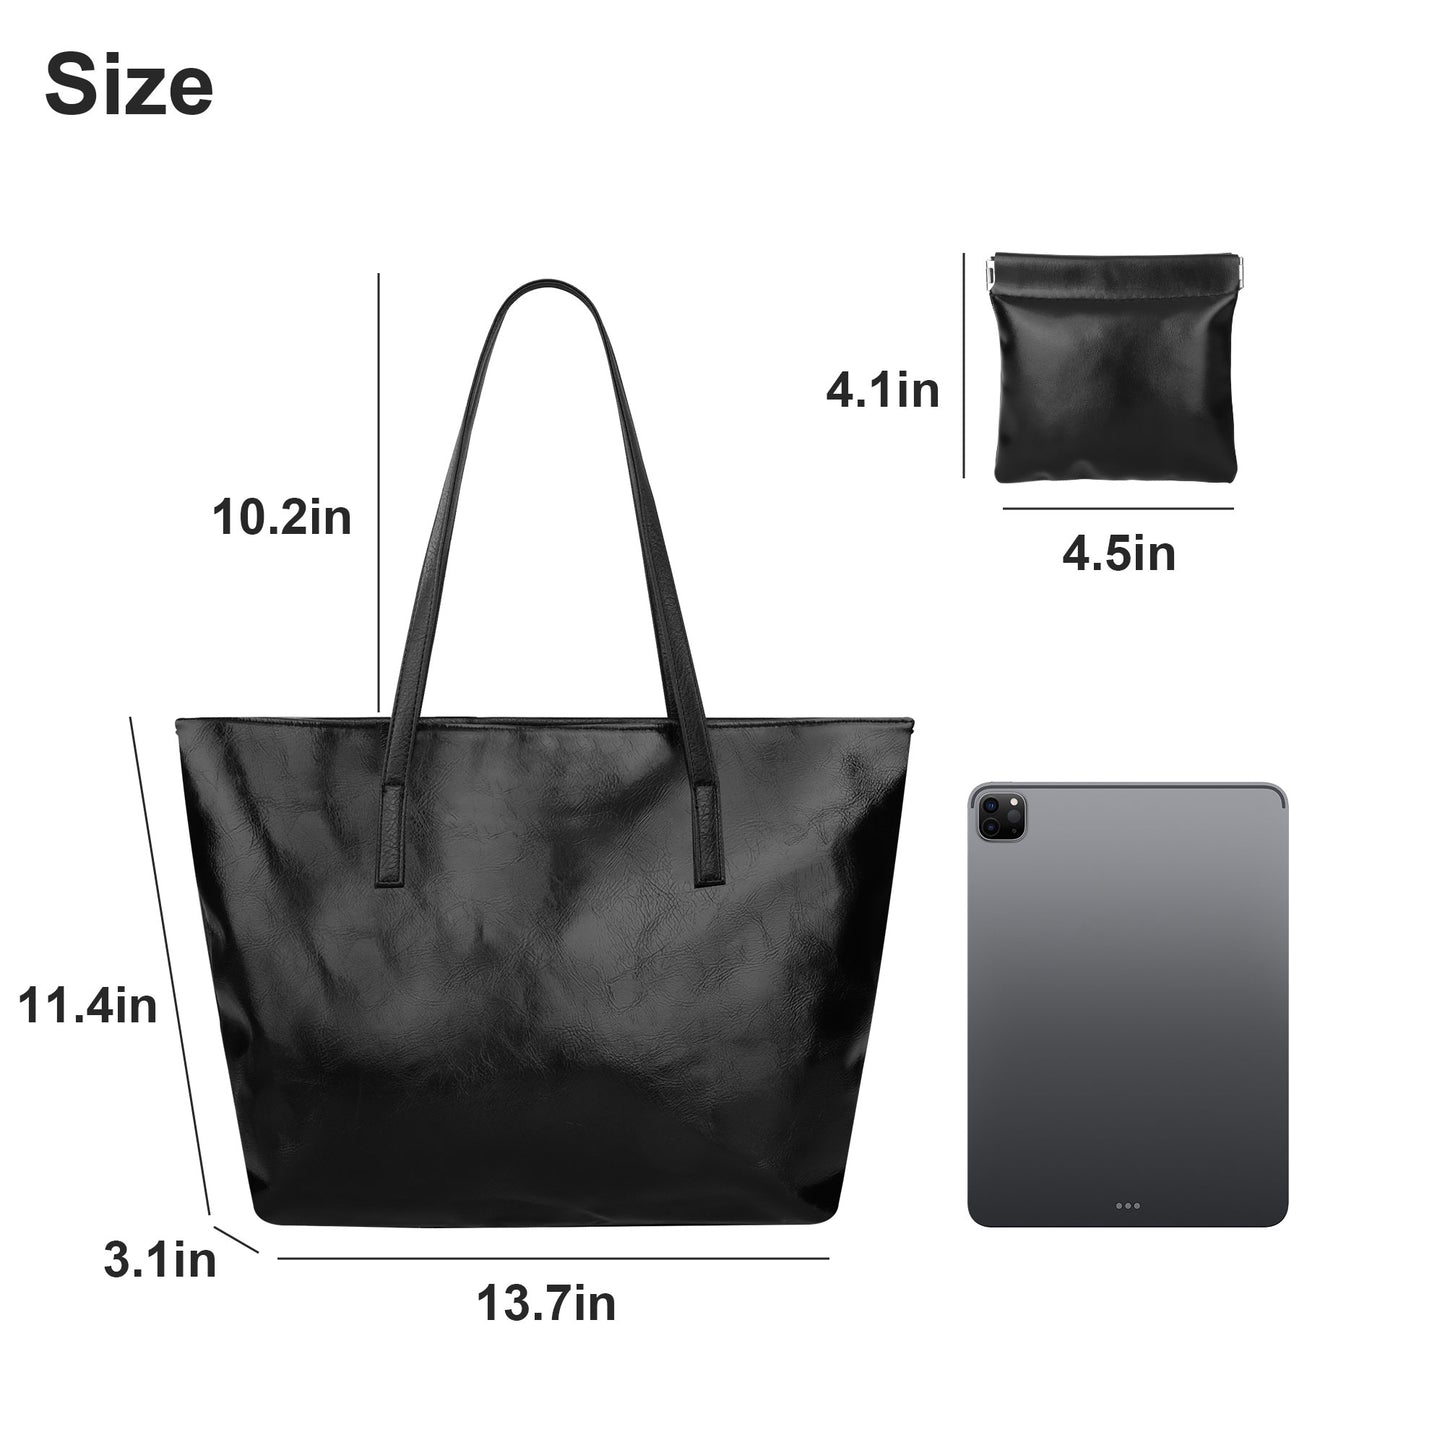 Large Capacity PU Leather Handbag with Purse Set - Women Tote Bag  Shoulder Bags Quality Soft Leather Purse Travel Bags Shopping Bag